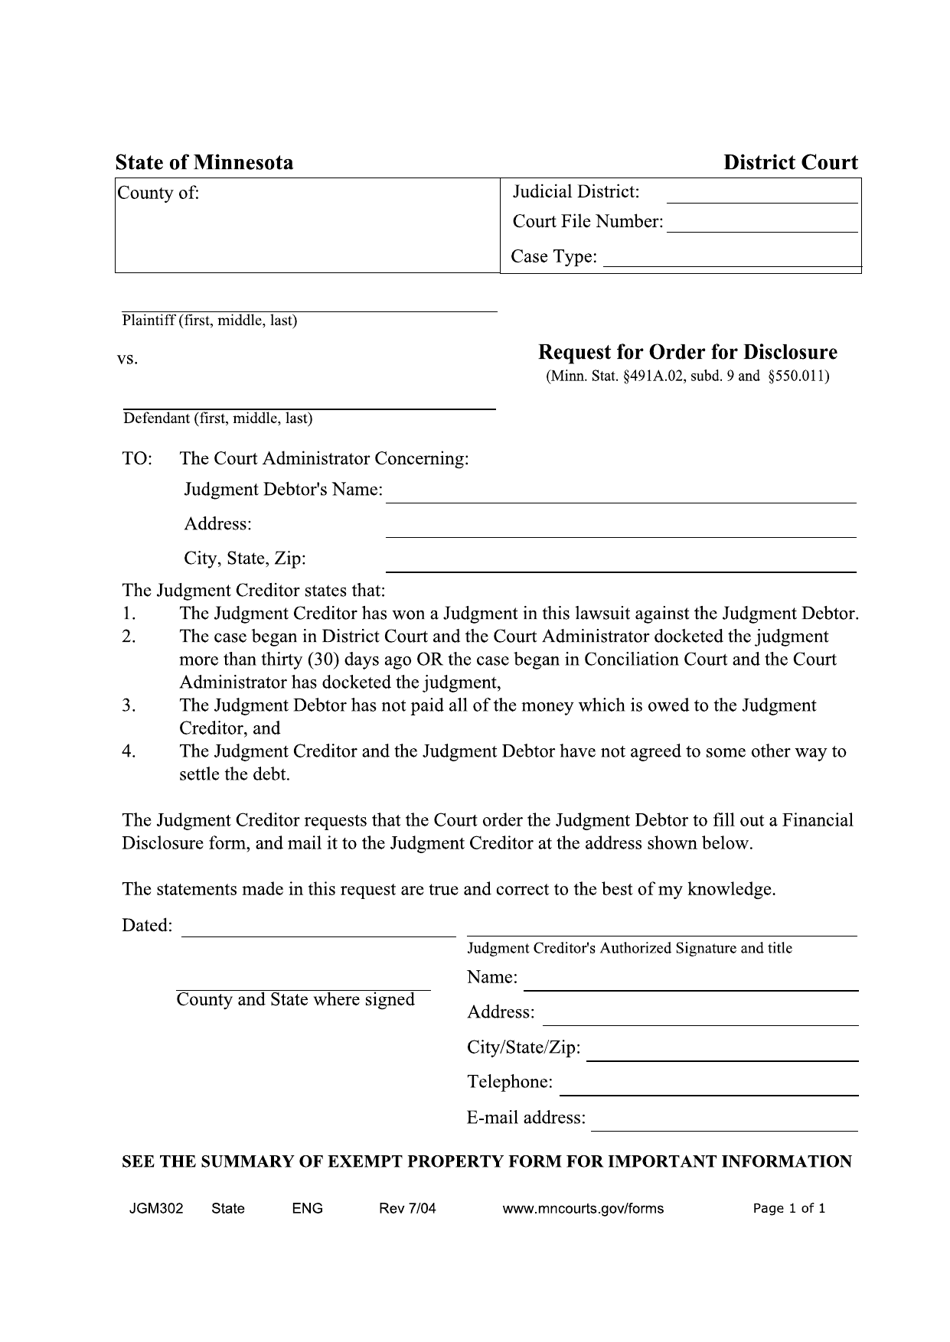 Form JGM302 Request for Order for Disclosure - Minnesota, Page 1